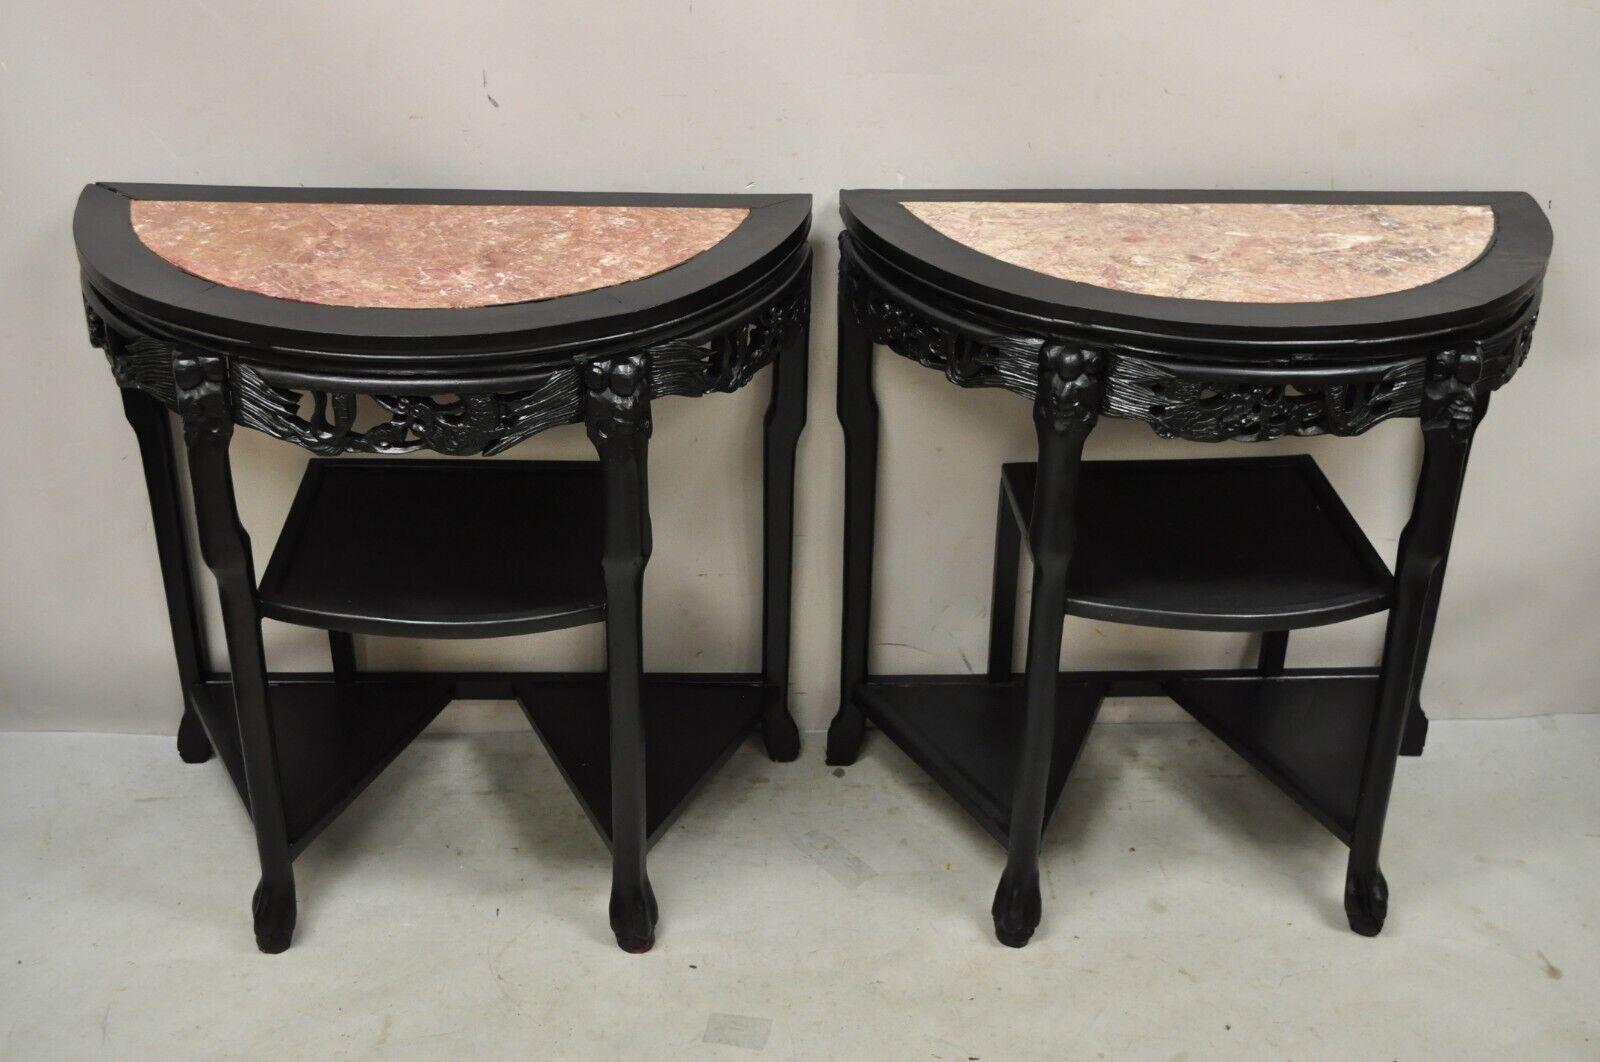 Vintage Chinese Chinoiserie Black Demilune Pink Marble Console Table - a Pair. Iem features a half round Demilune form, inset pink marble tops, figural carved details, multiple shelf tiers, very nice vintage pair, great style and form. Circa Mid to